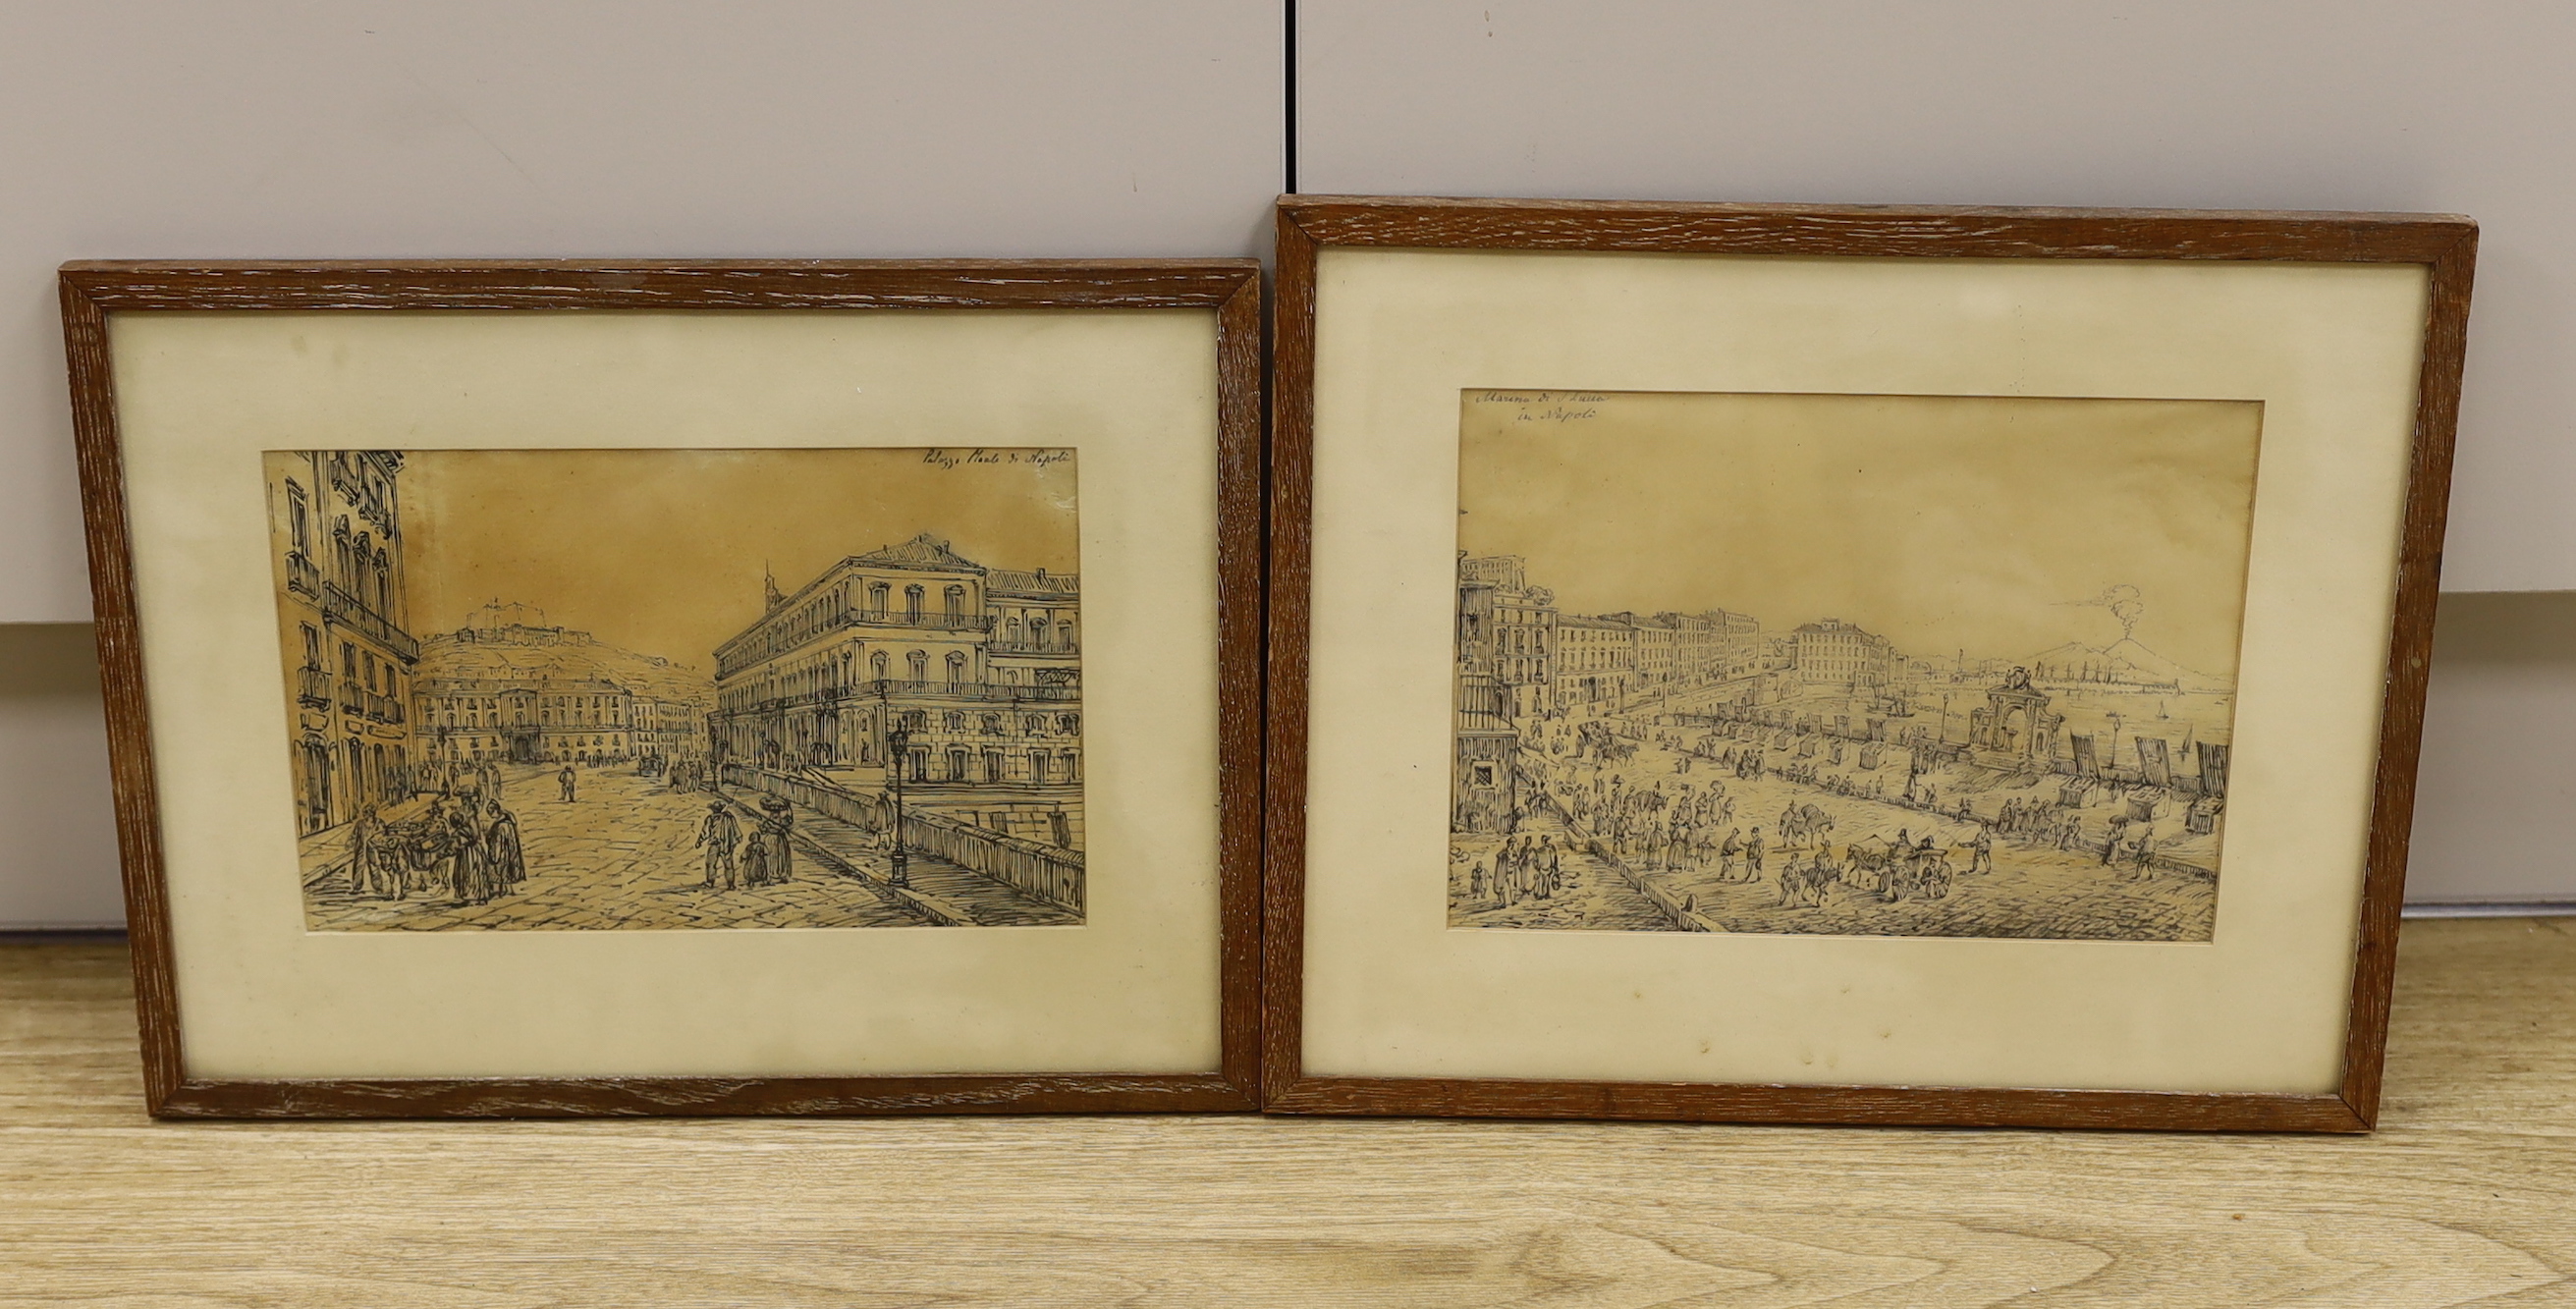 19th century Neapolitan School, two pen and ink drawings, Naples views, each inscribed, largest 17 x 24cm